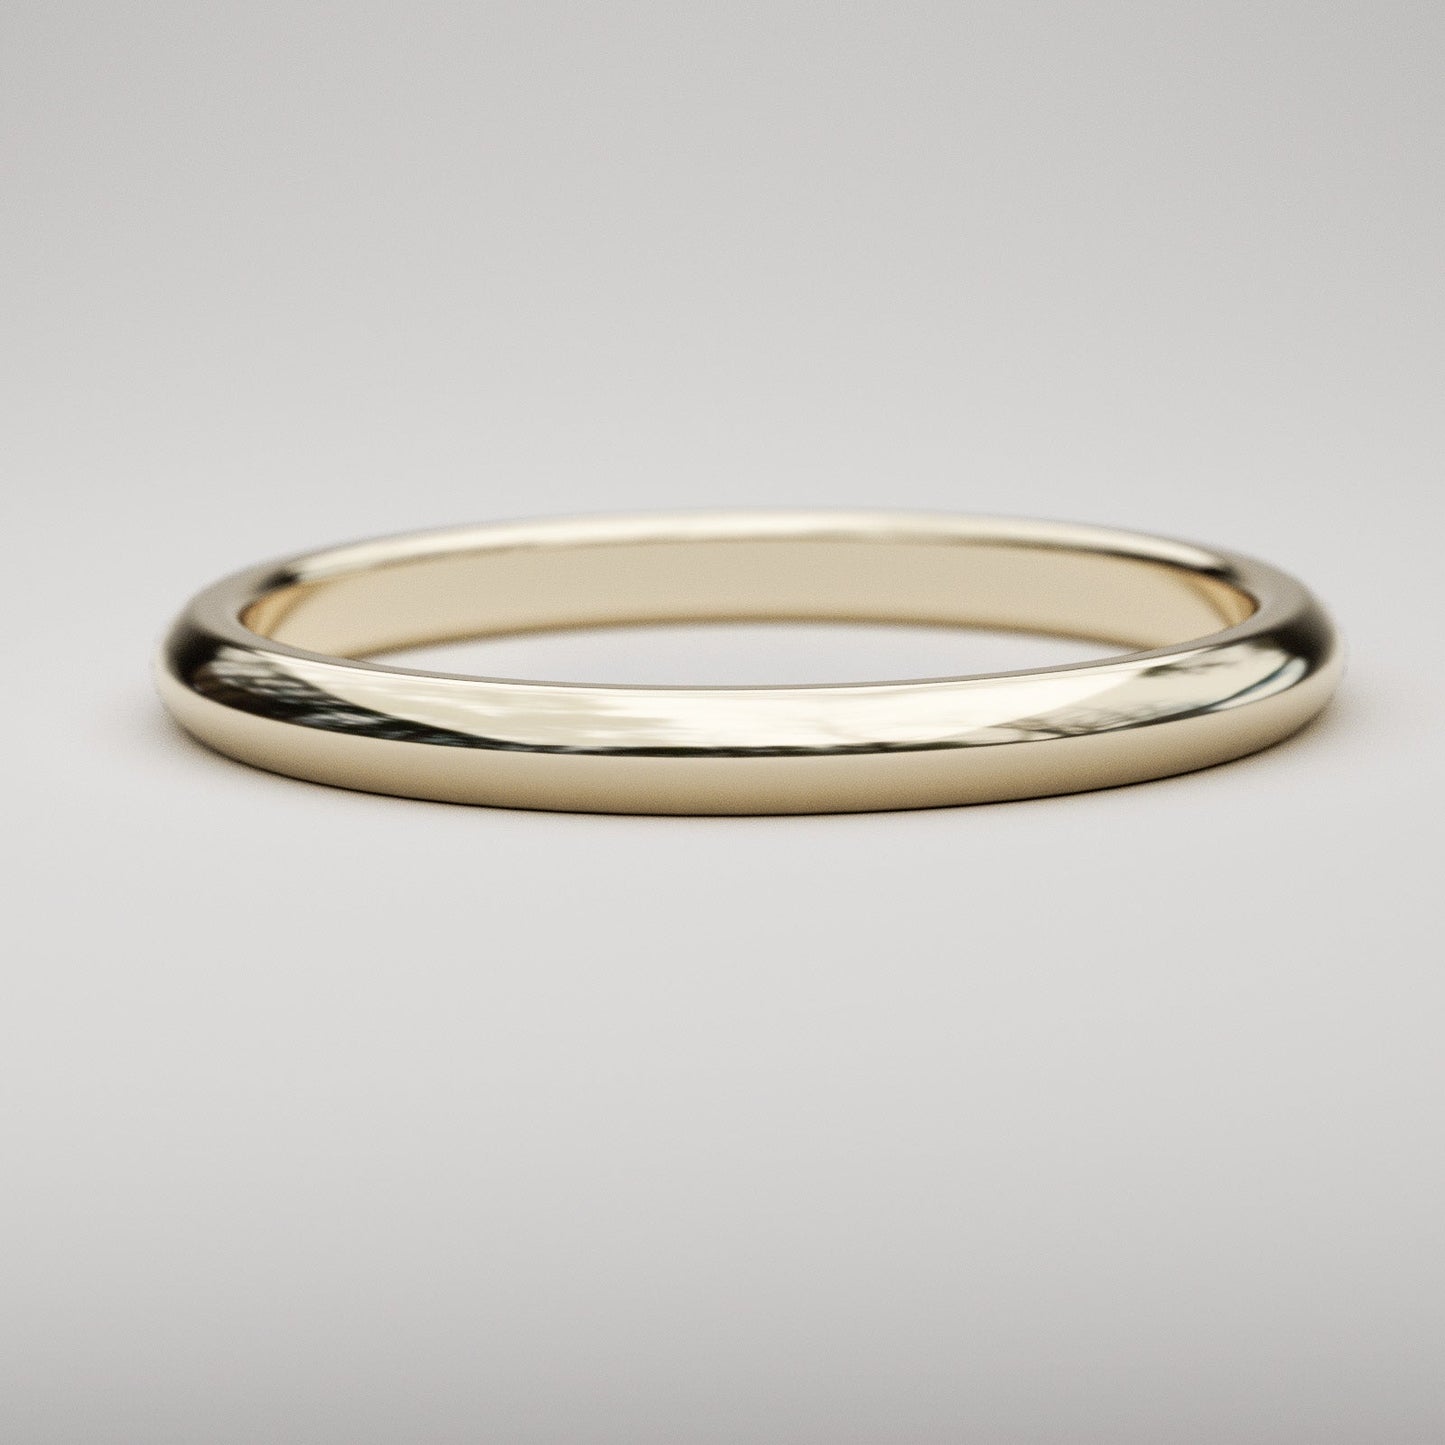 traditional 2mm wide wedding band in yellow gold